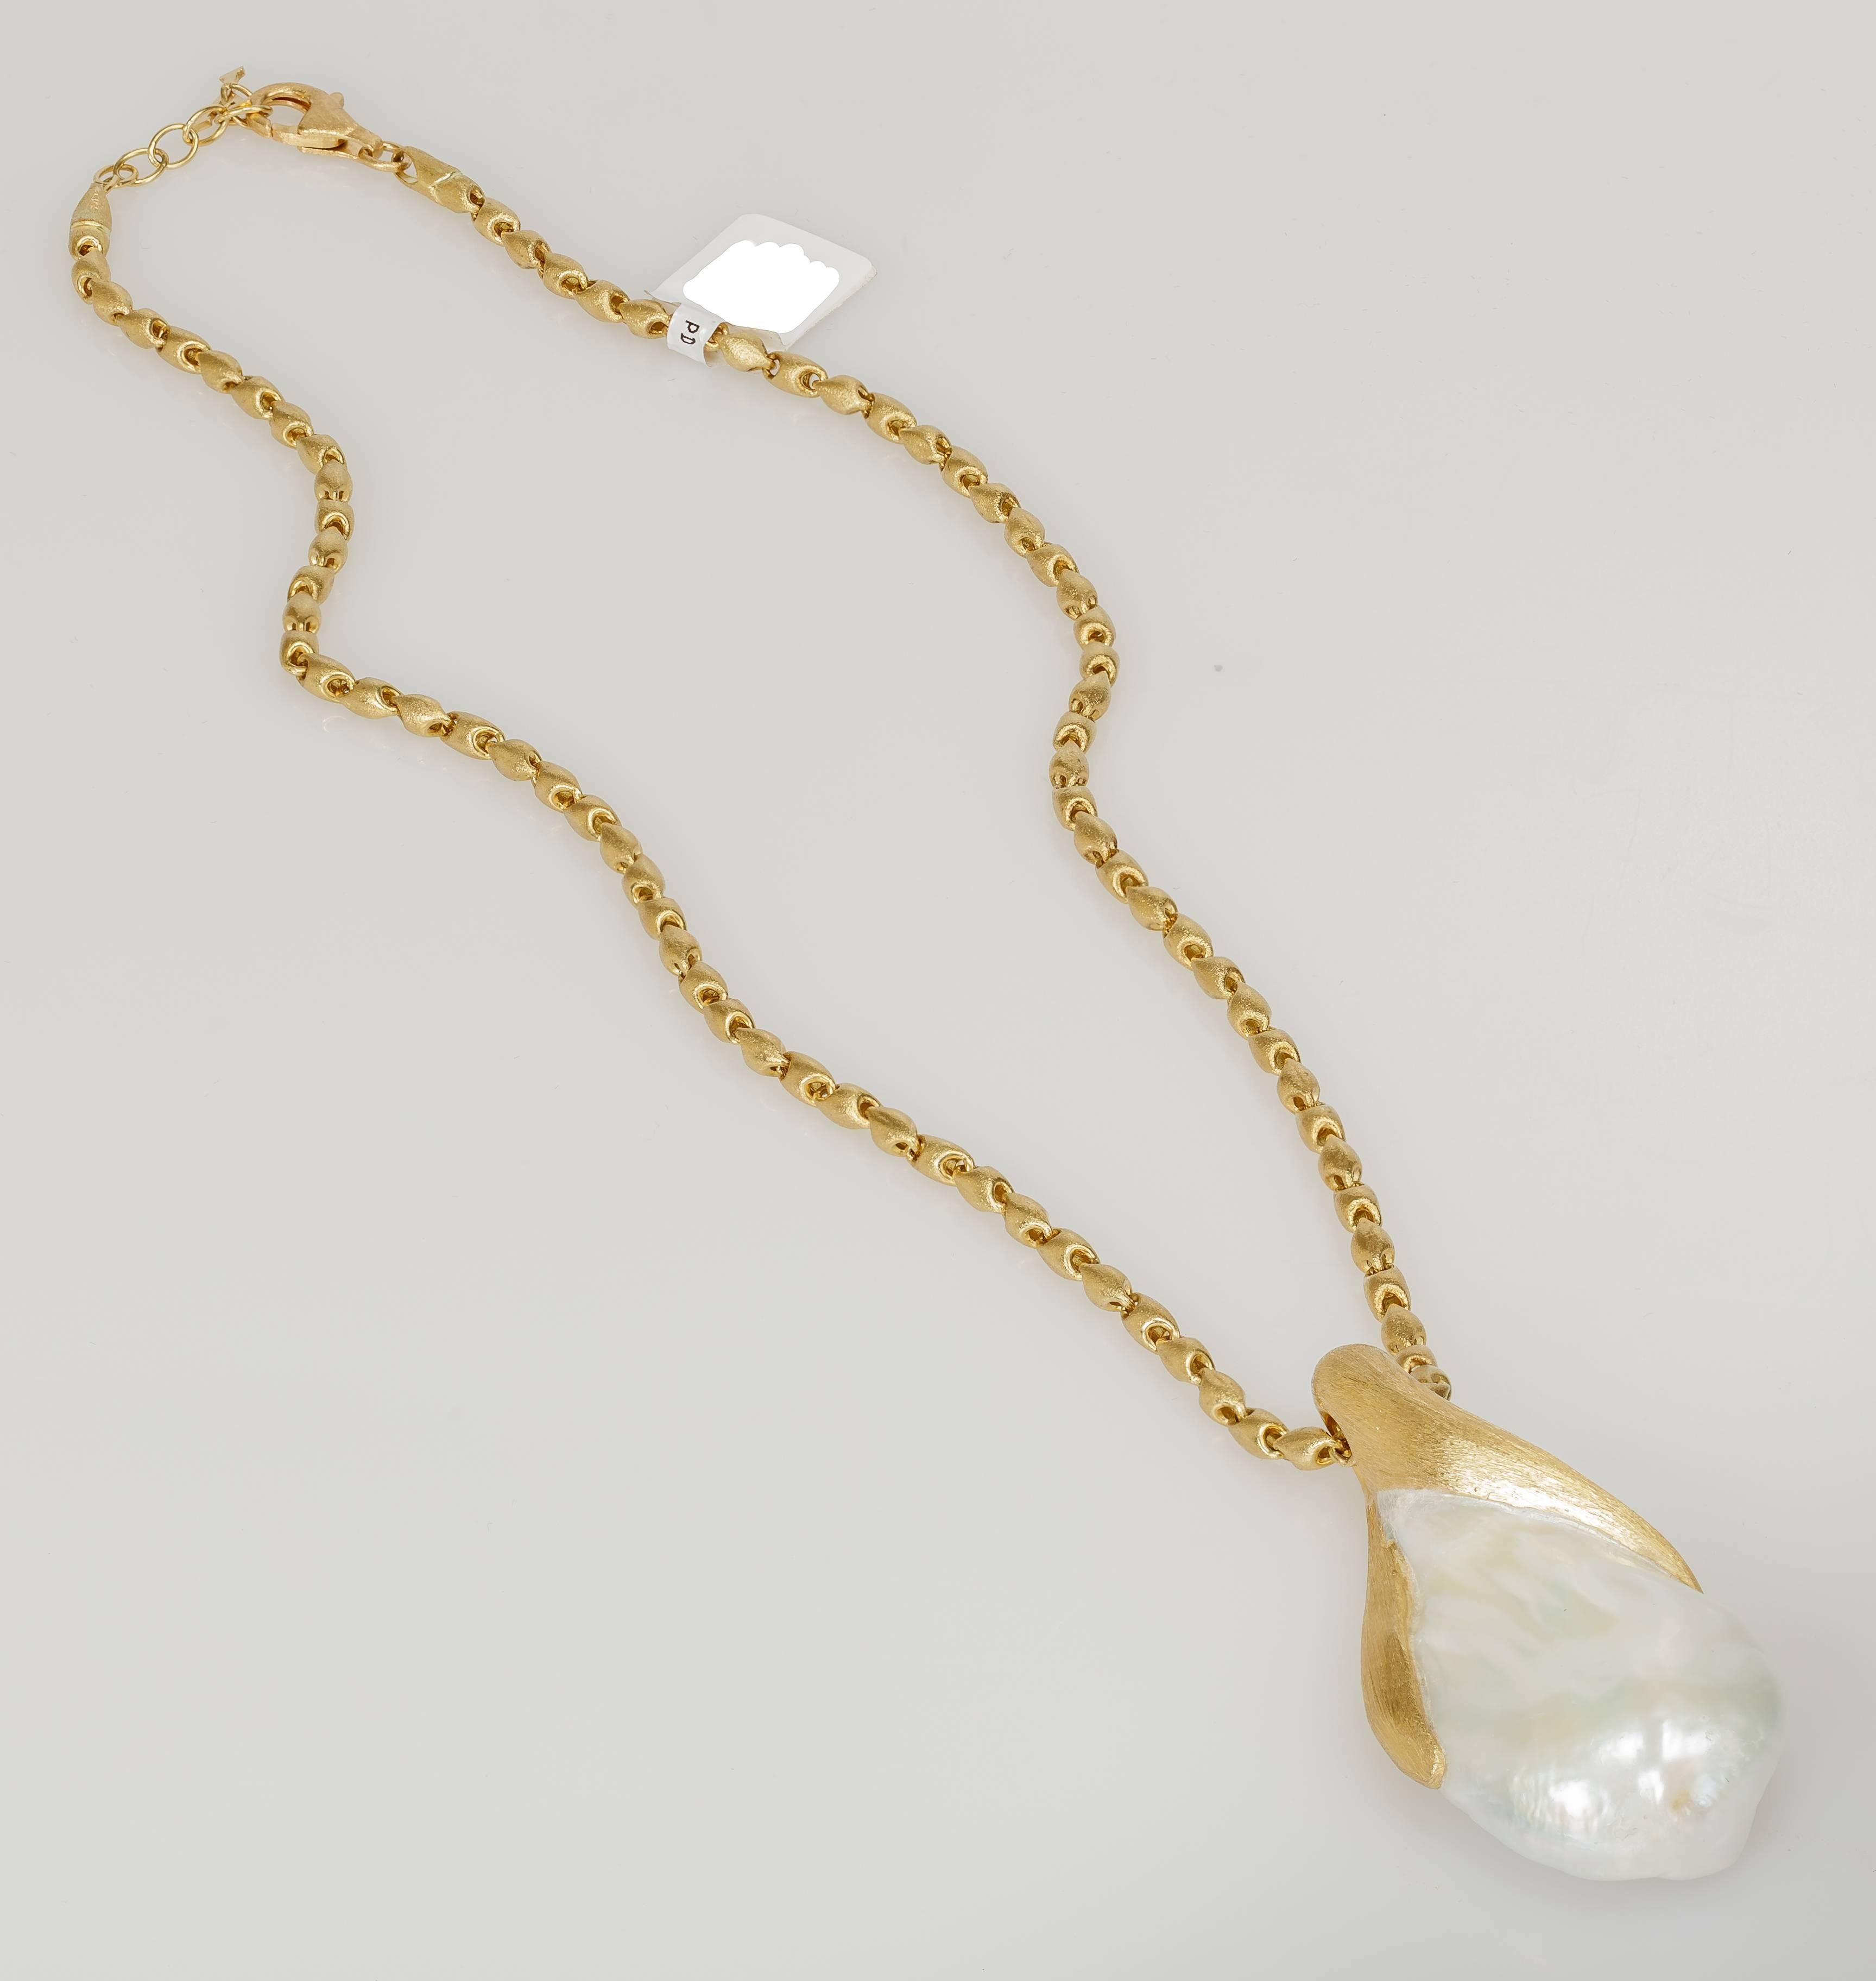 This Yvel necklace features a large white baroque pearl pendant set on a satin brushed 18k yellow gold 18 inch chain.